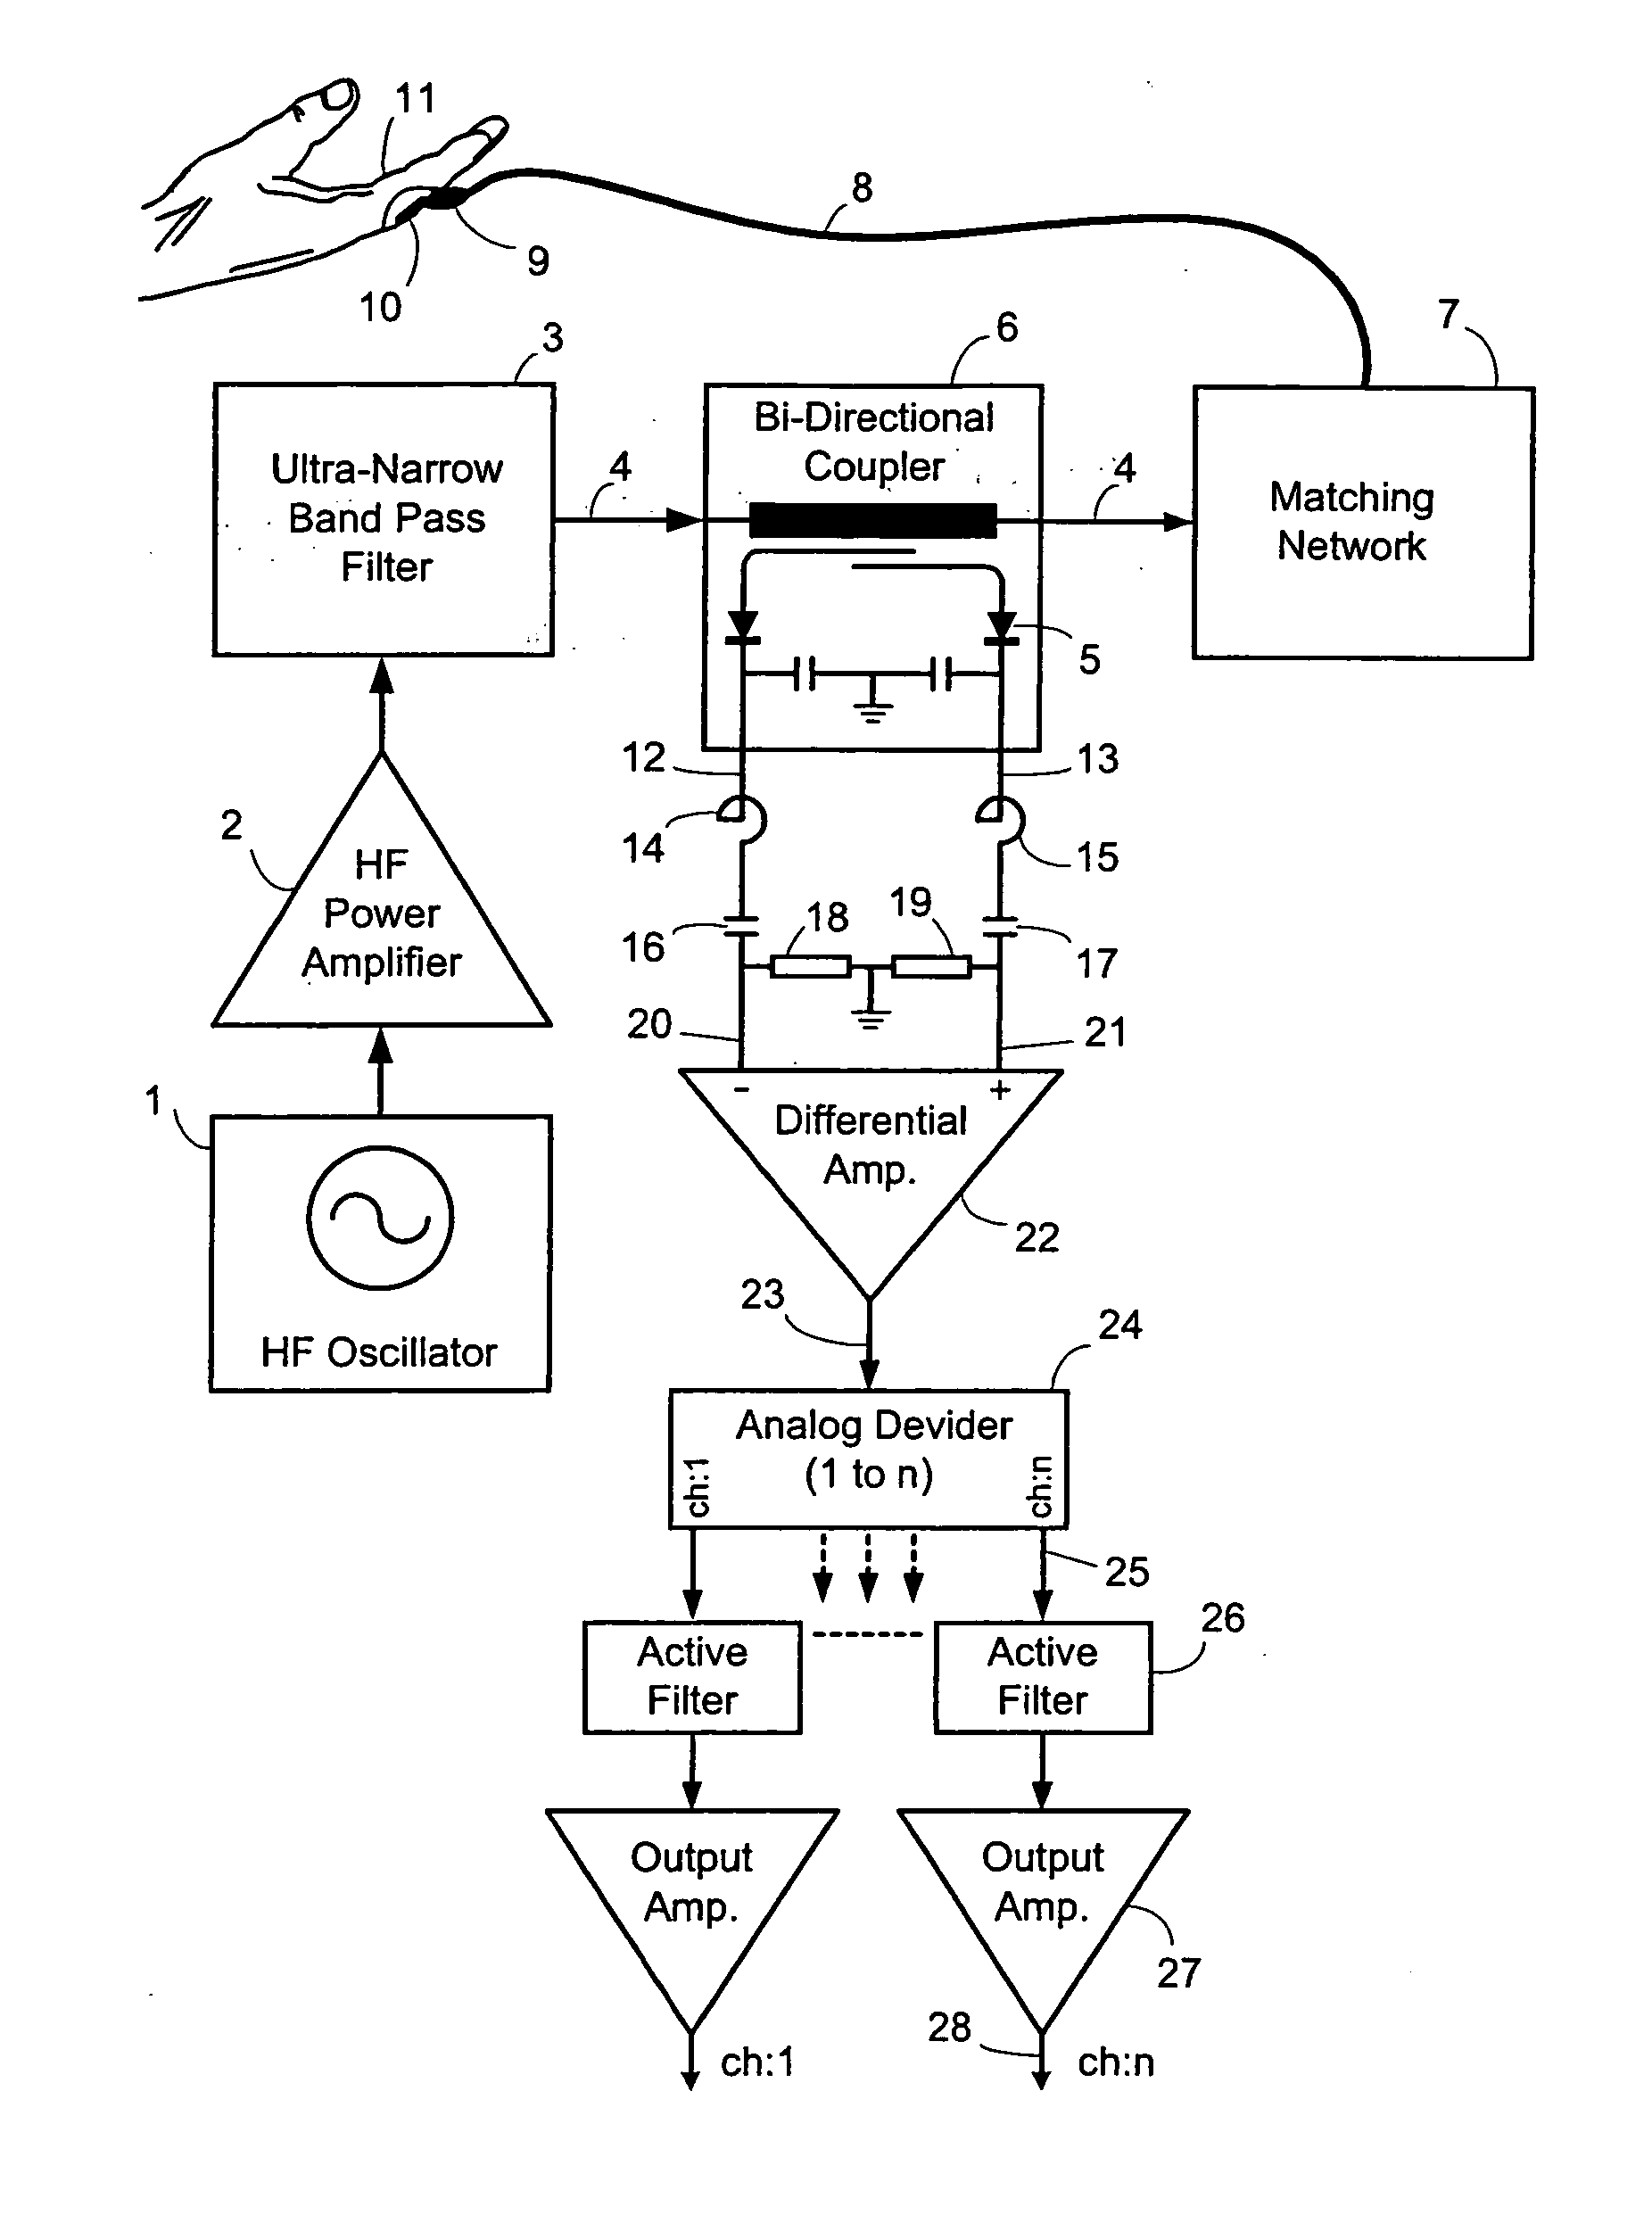 Method and apparatus for non-contact monitoring of cellular bioactivity